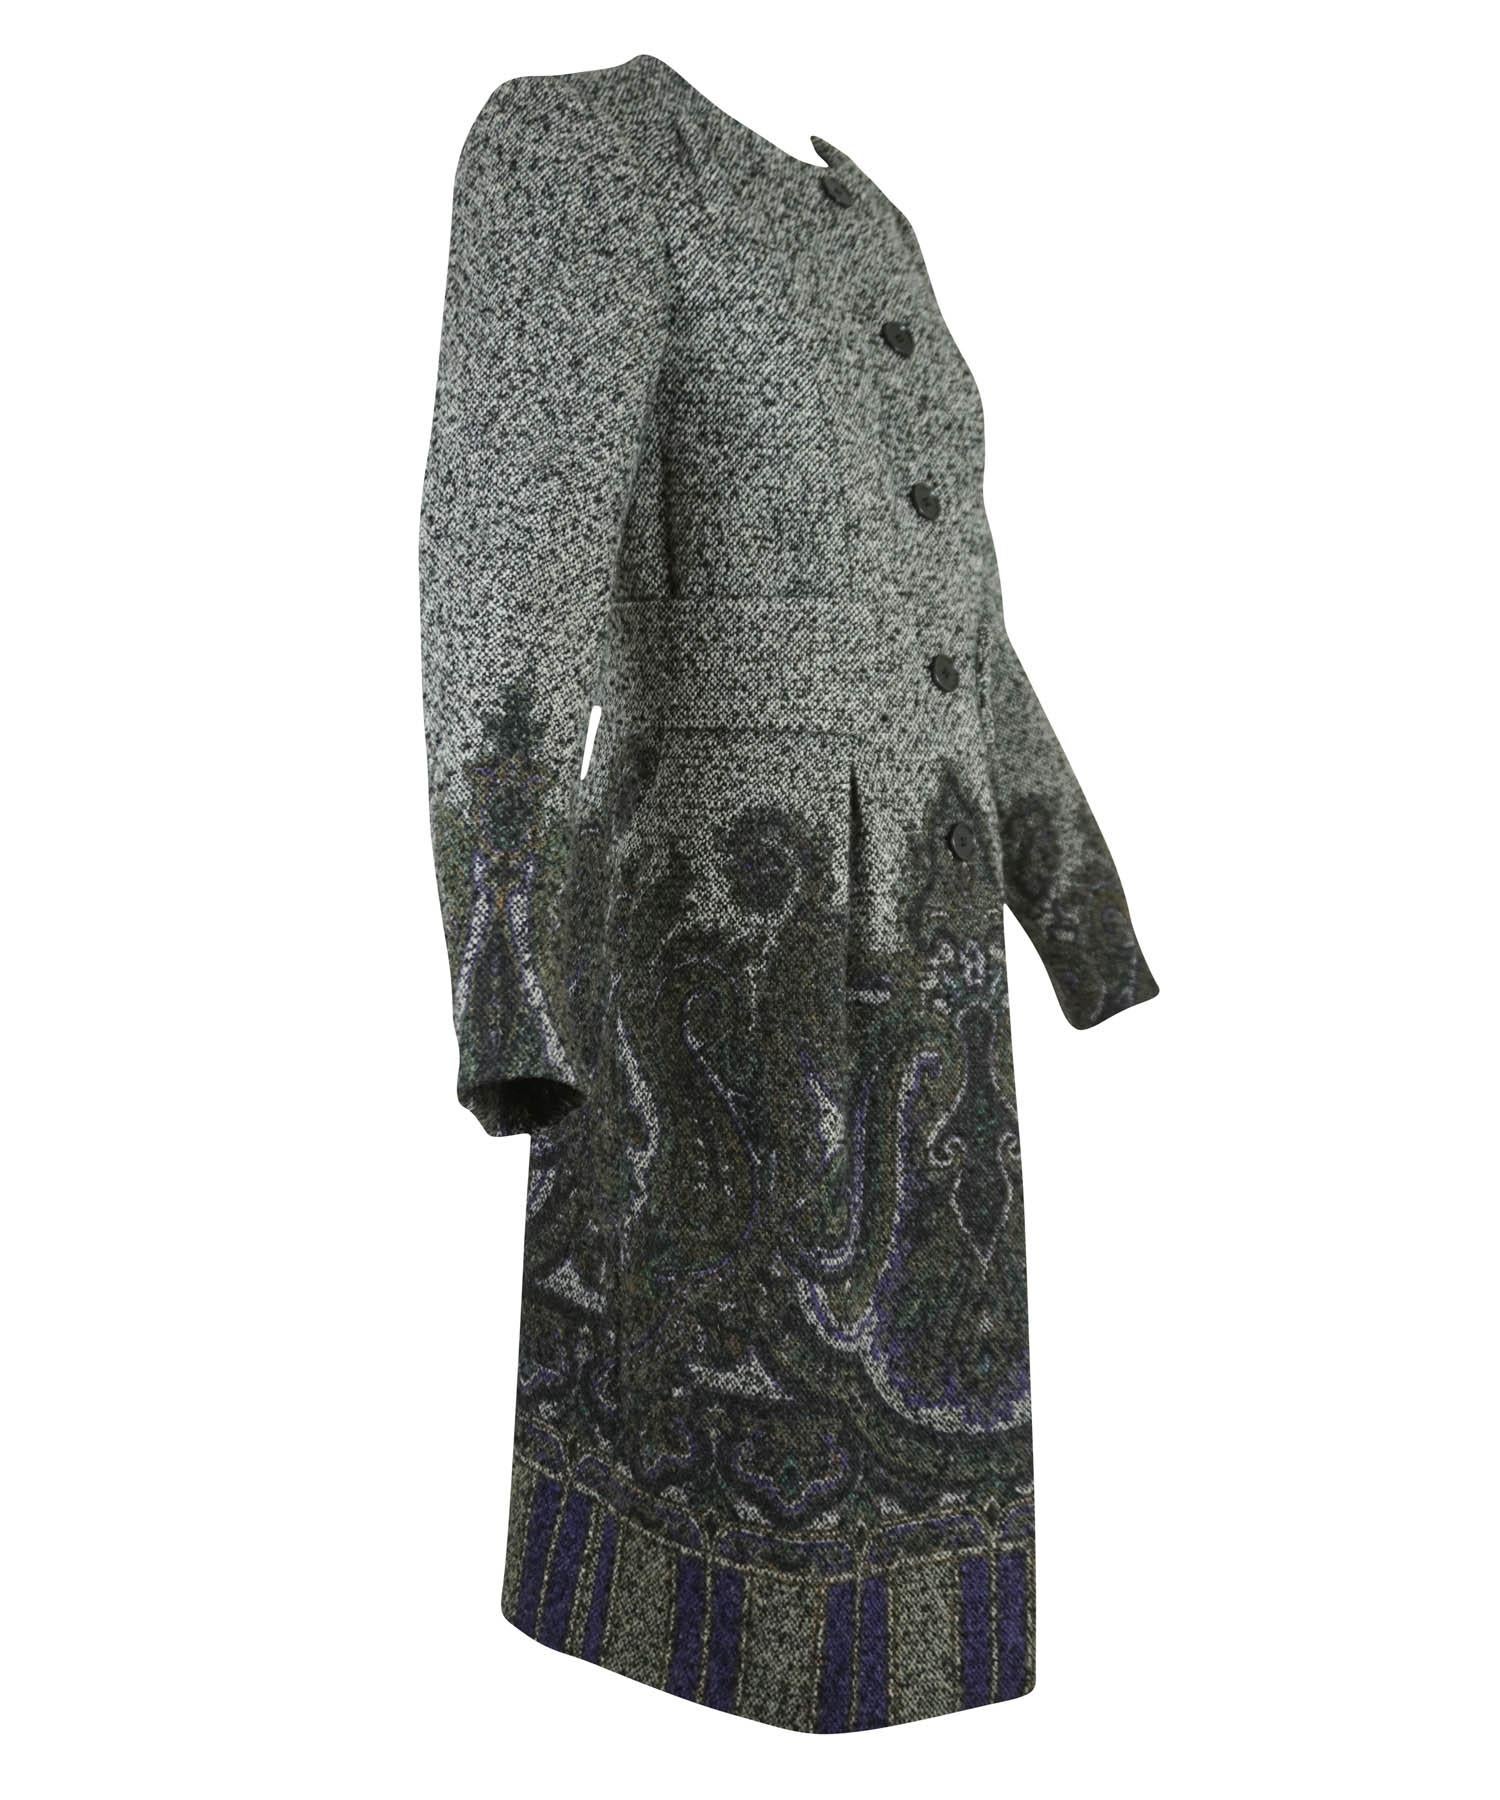 Etro black and white tweed coat with paisley print. Features, long sleeves, round neck, button front, slightly gathered skirt belted waist and paisley print at skirt and cuffs. Designer size 42, USA 6. Made in Italy.



Condition - Excellent. 

